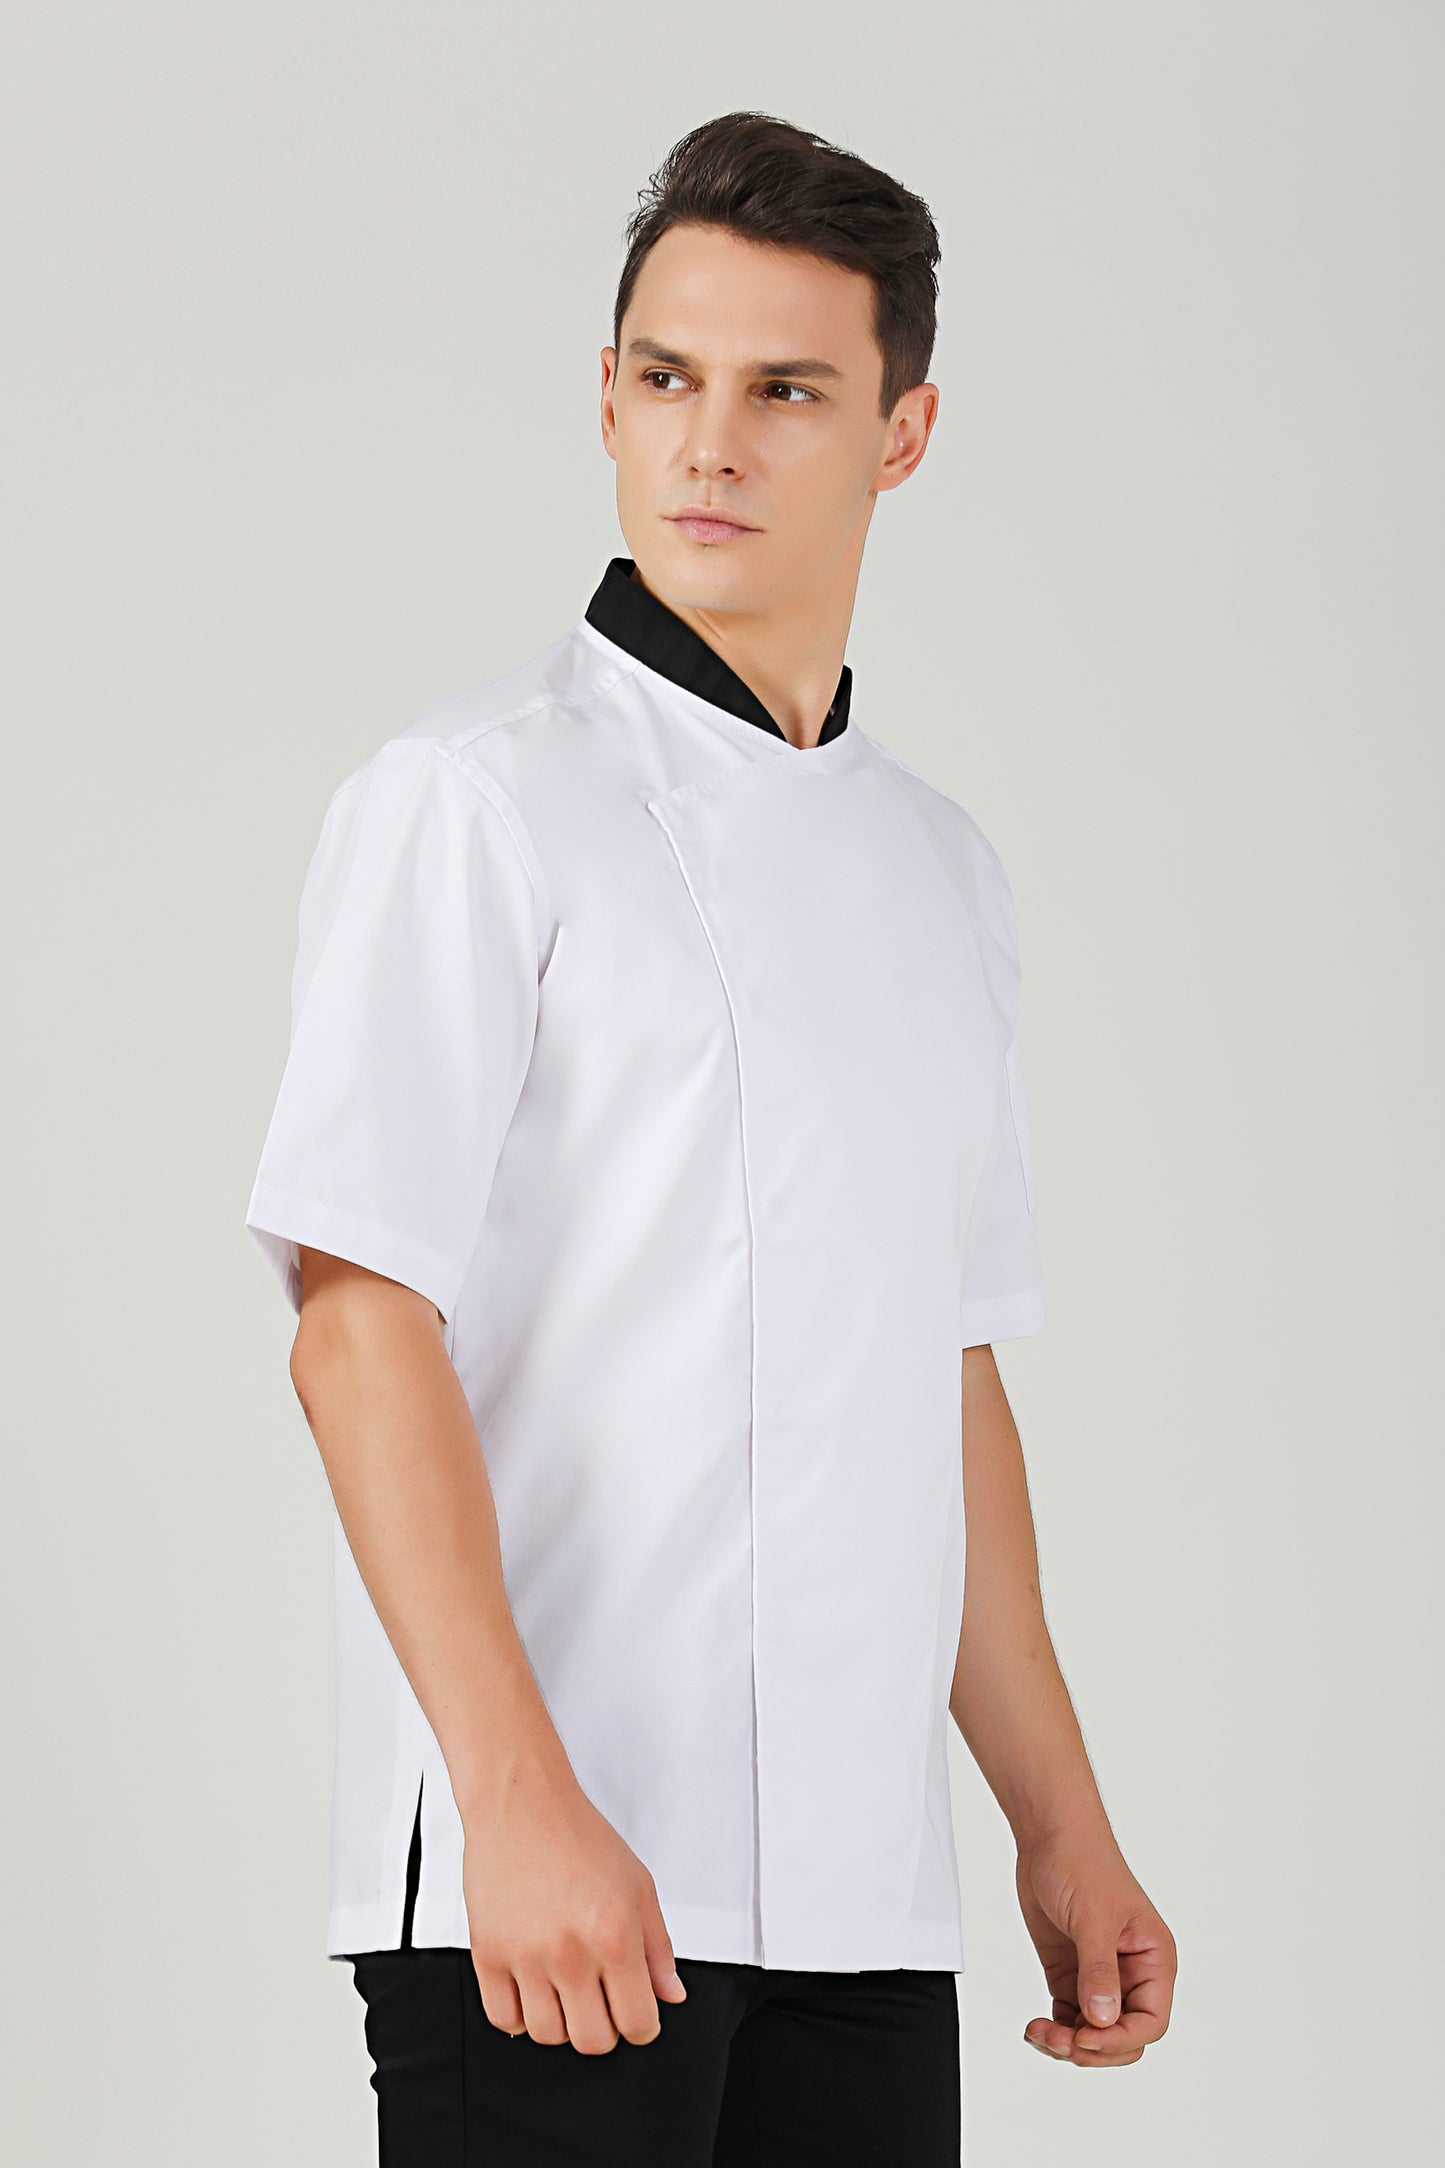 Willow Chef Jacket, Short Sleeve